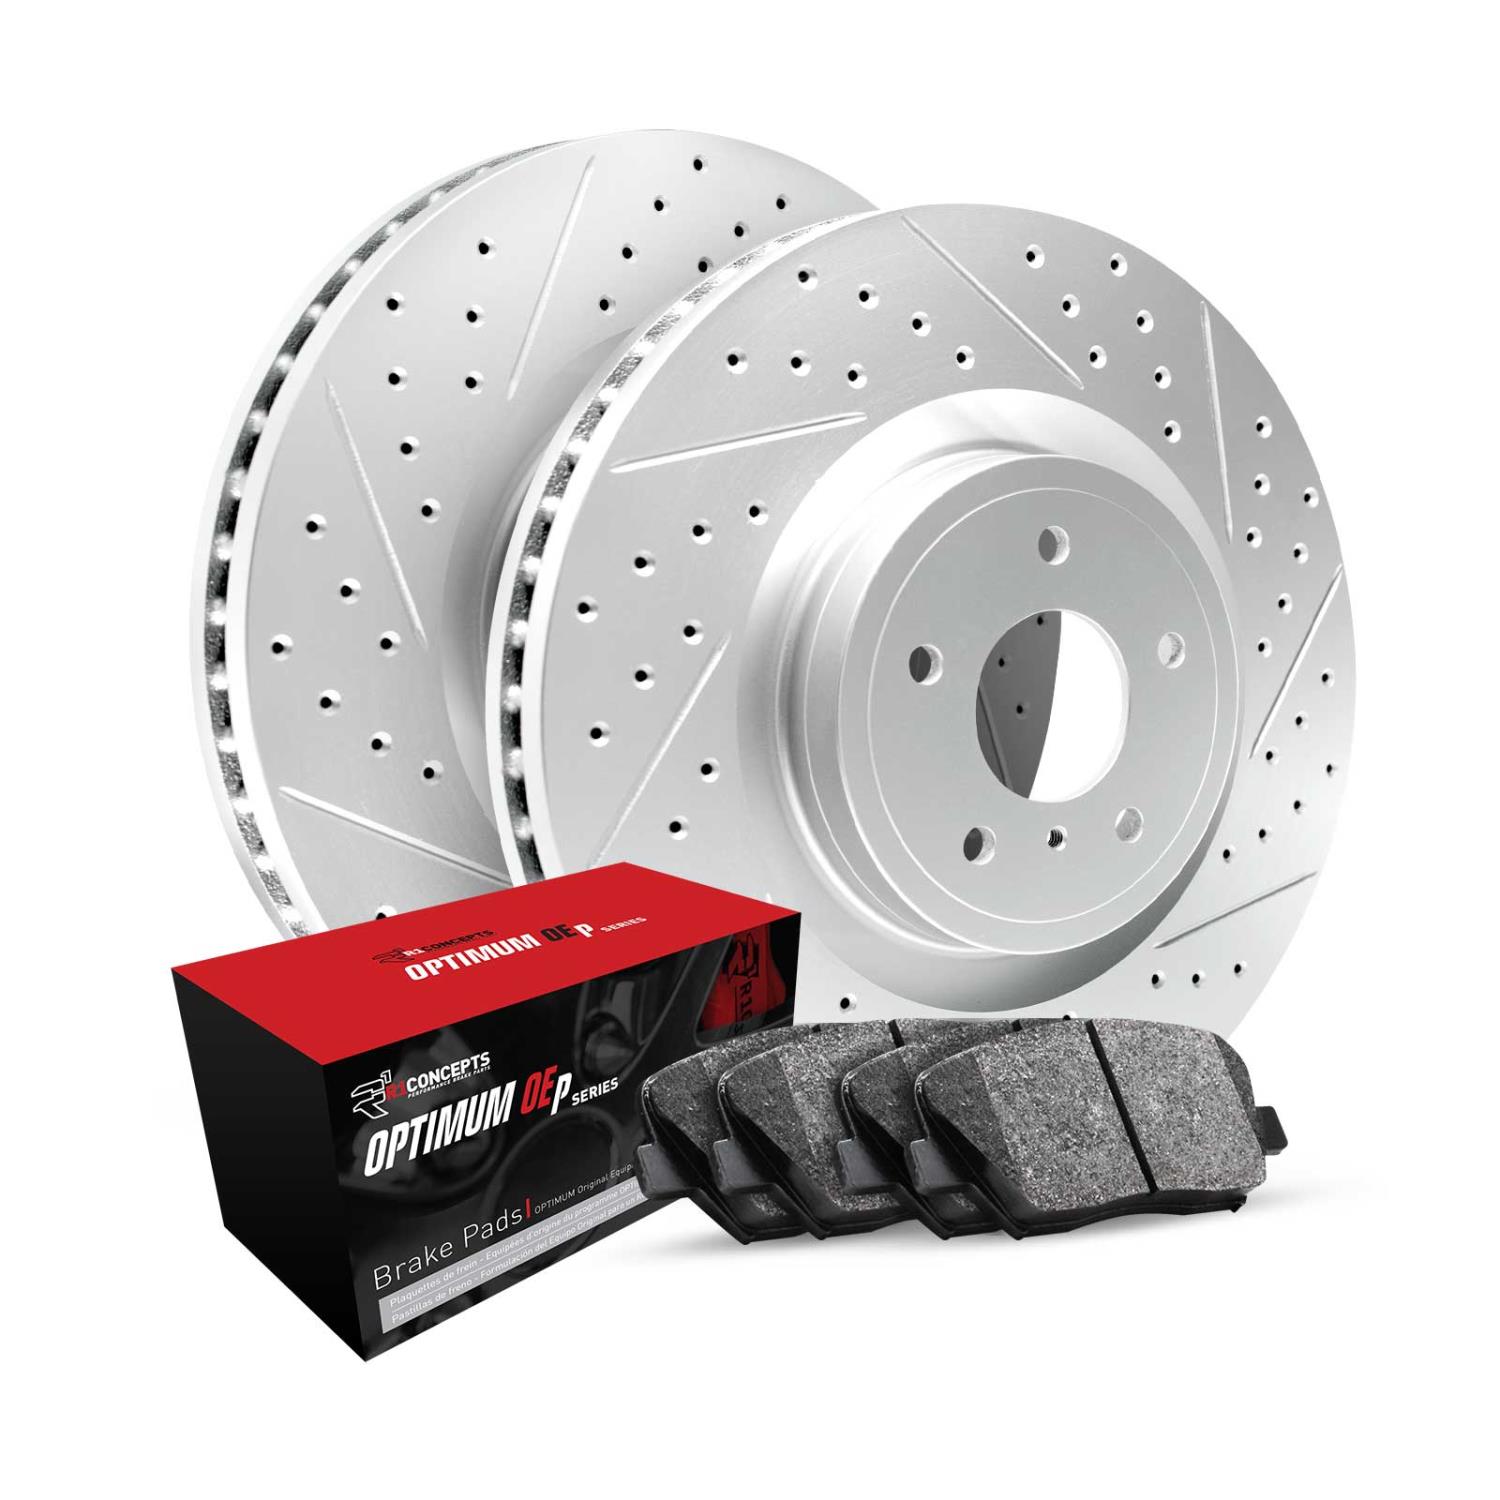 GEO-Carbon Drilled & Slotted Brake Rotor Set w/Optimum OE Pads, 2000-2005 Lexus/Toyota/Scion, Position: Rear